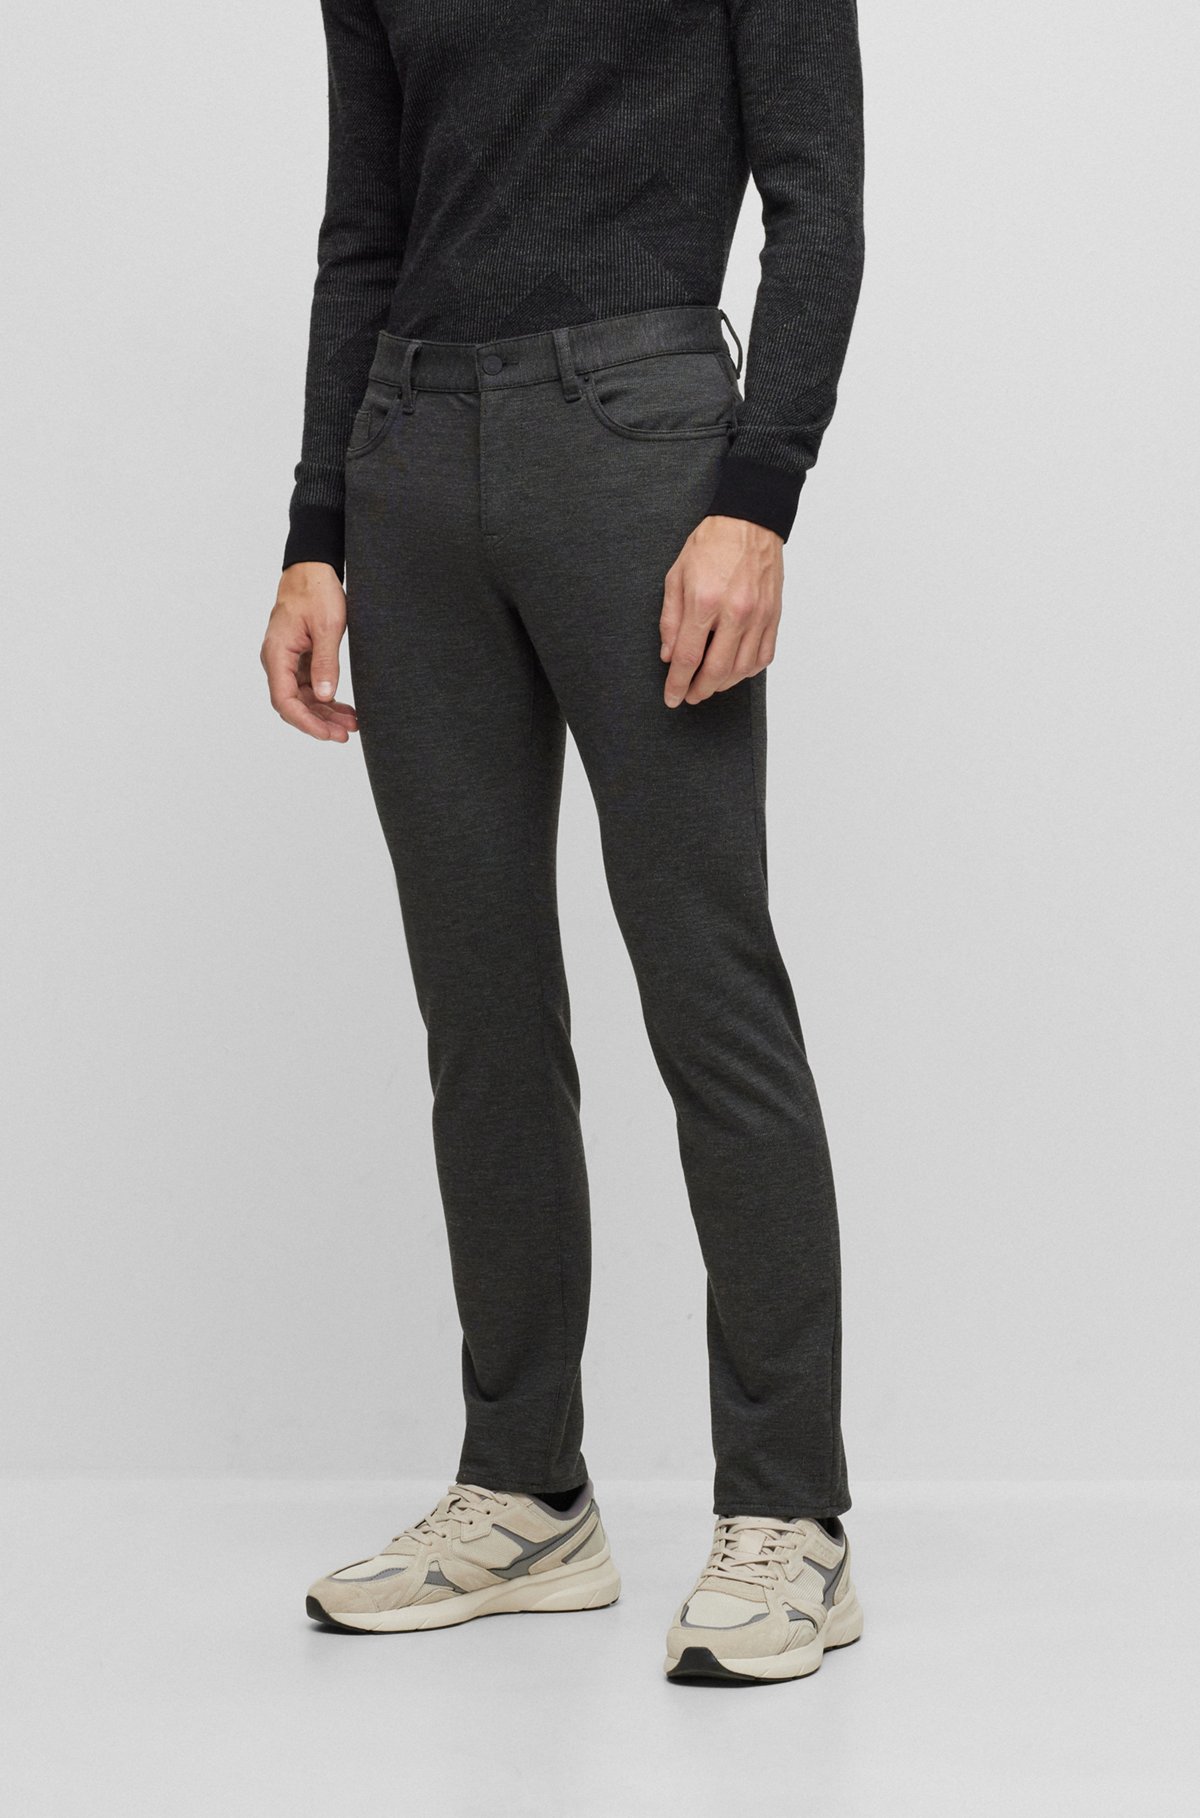 BOSS - Slim-fit jeans in micro-patterned brushed stretch jersey